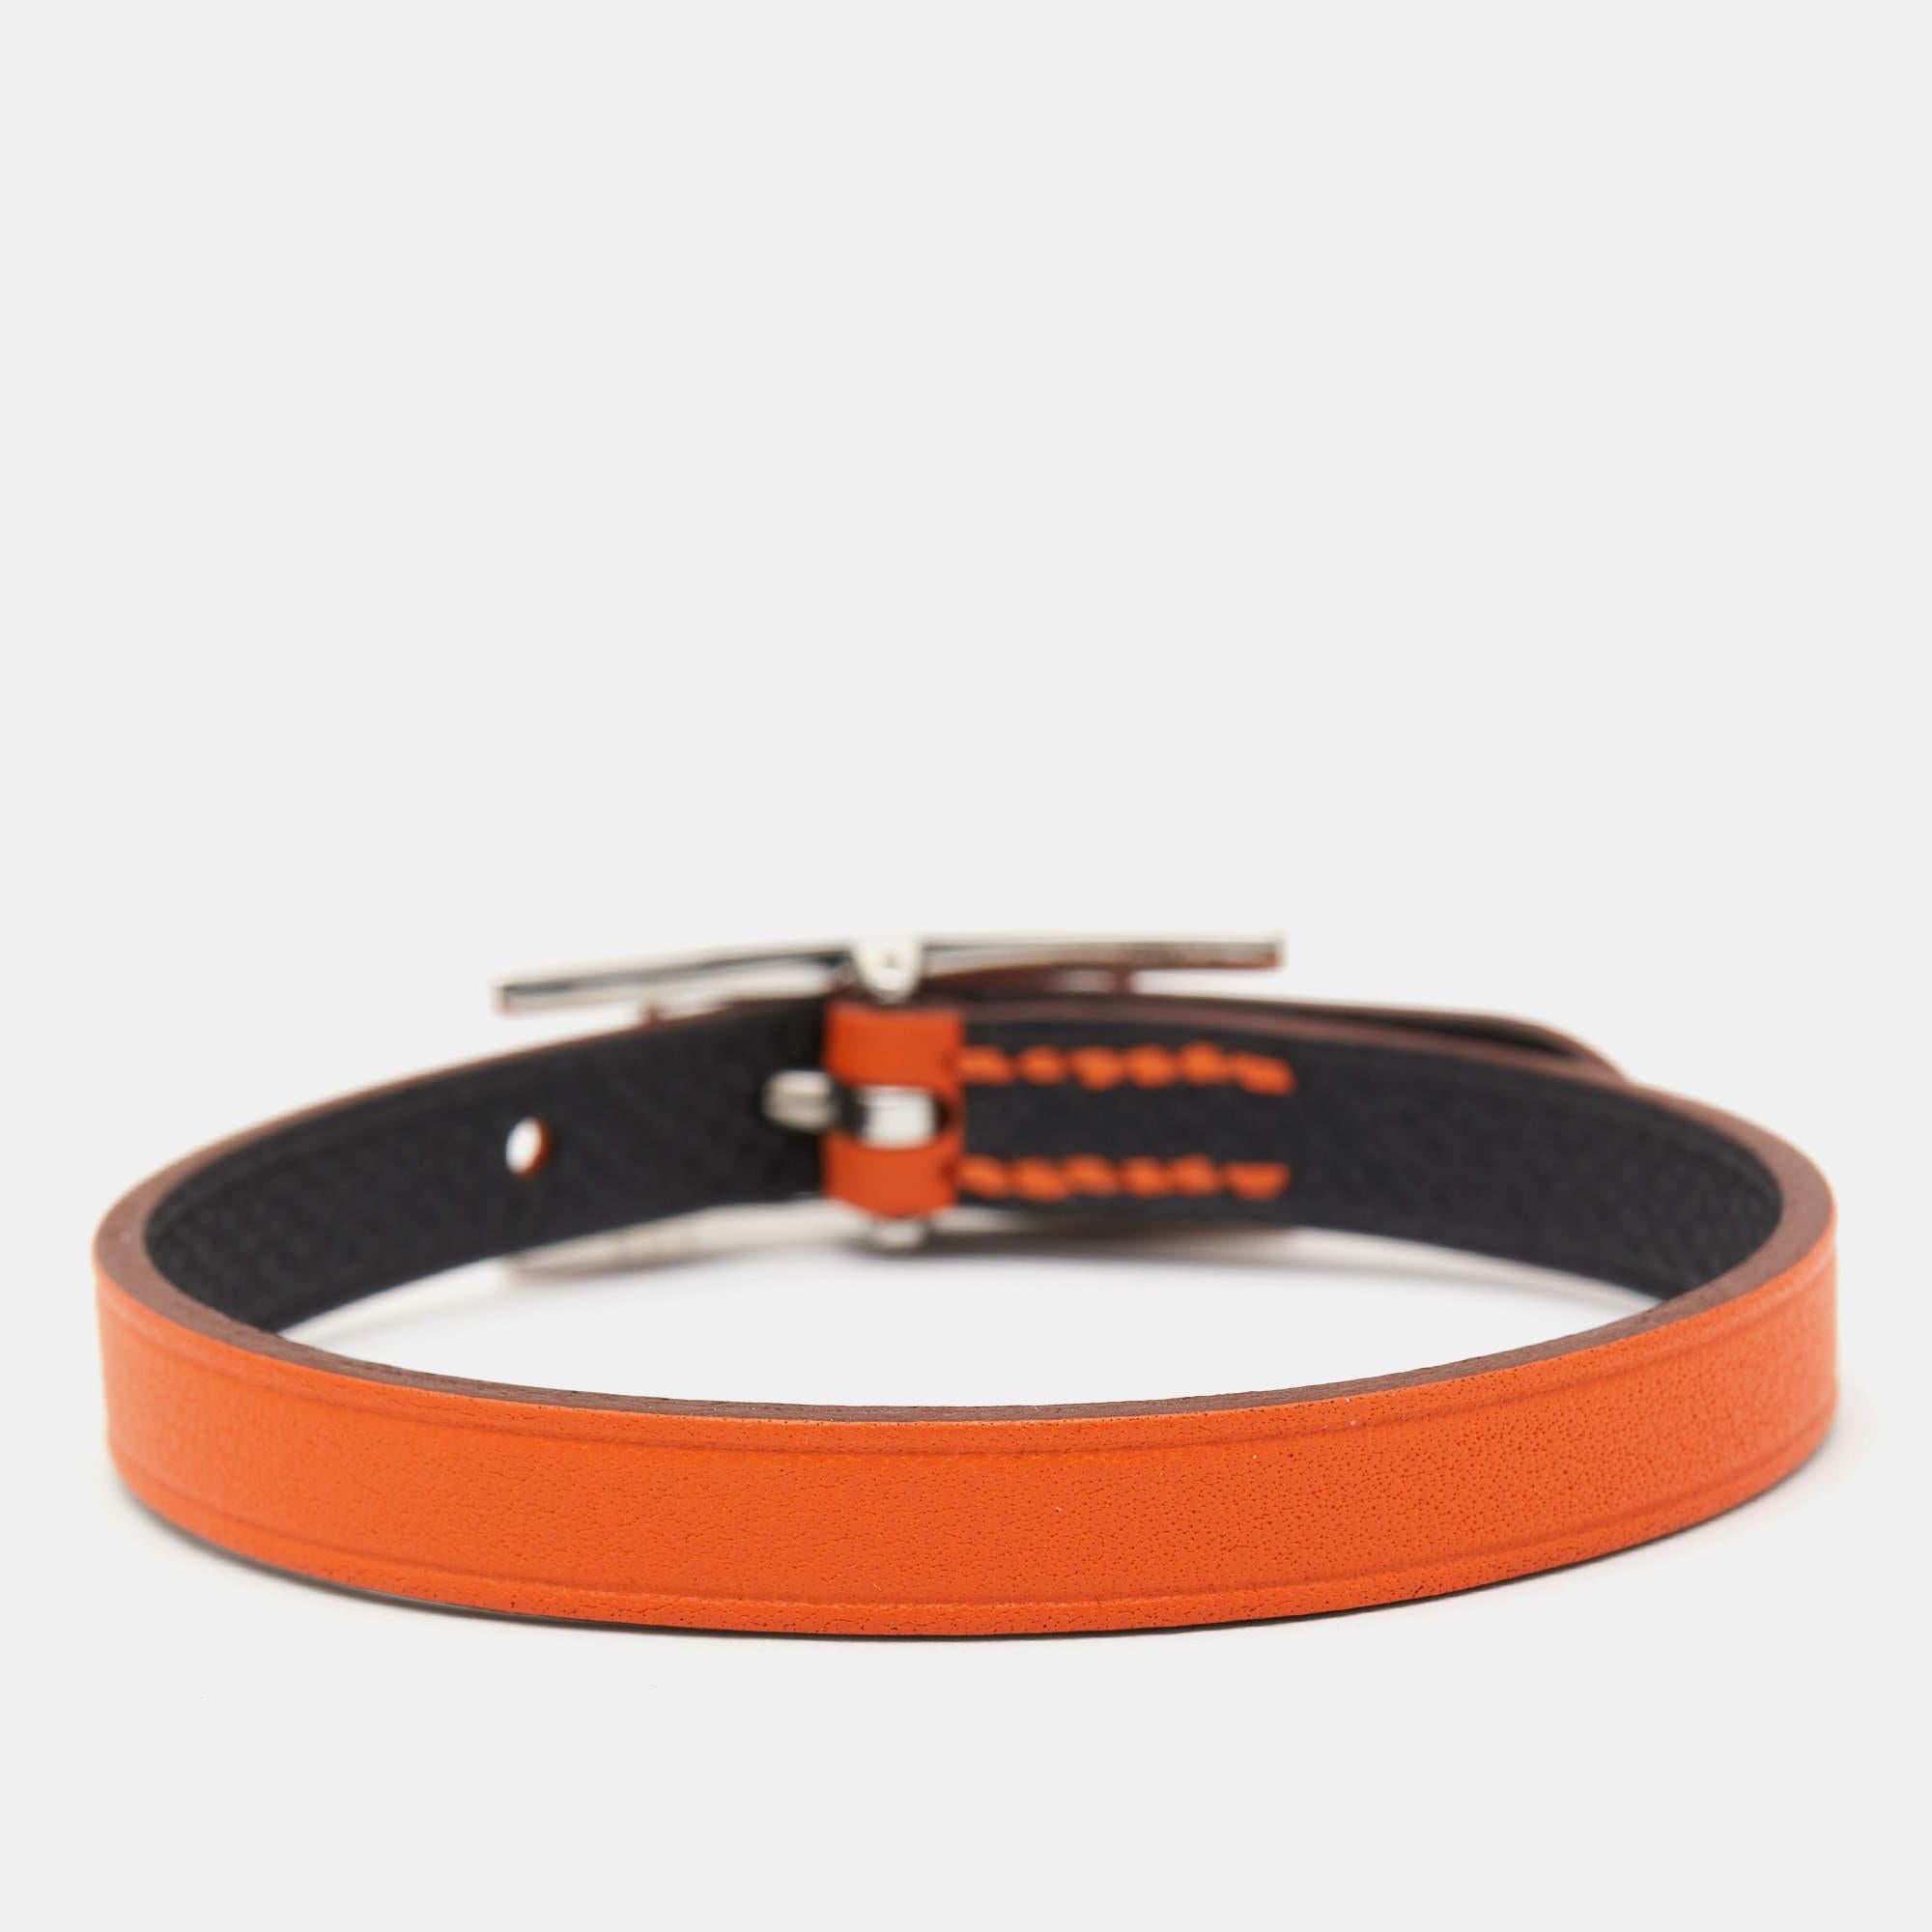 The Hermès Behapi bracelet is an exquisite accessory crafted by the renowned luxury brand, Hermès. It features high-quality leather in various vibrant colors, adorned with a palladium-plated H-shaped buckle closure, combining elegance and style for